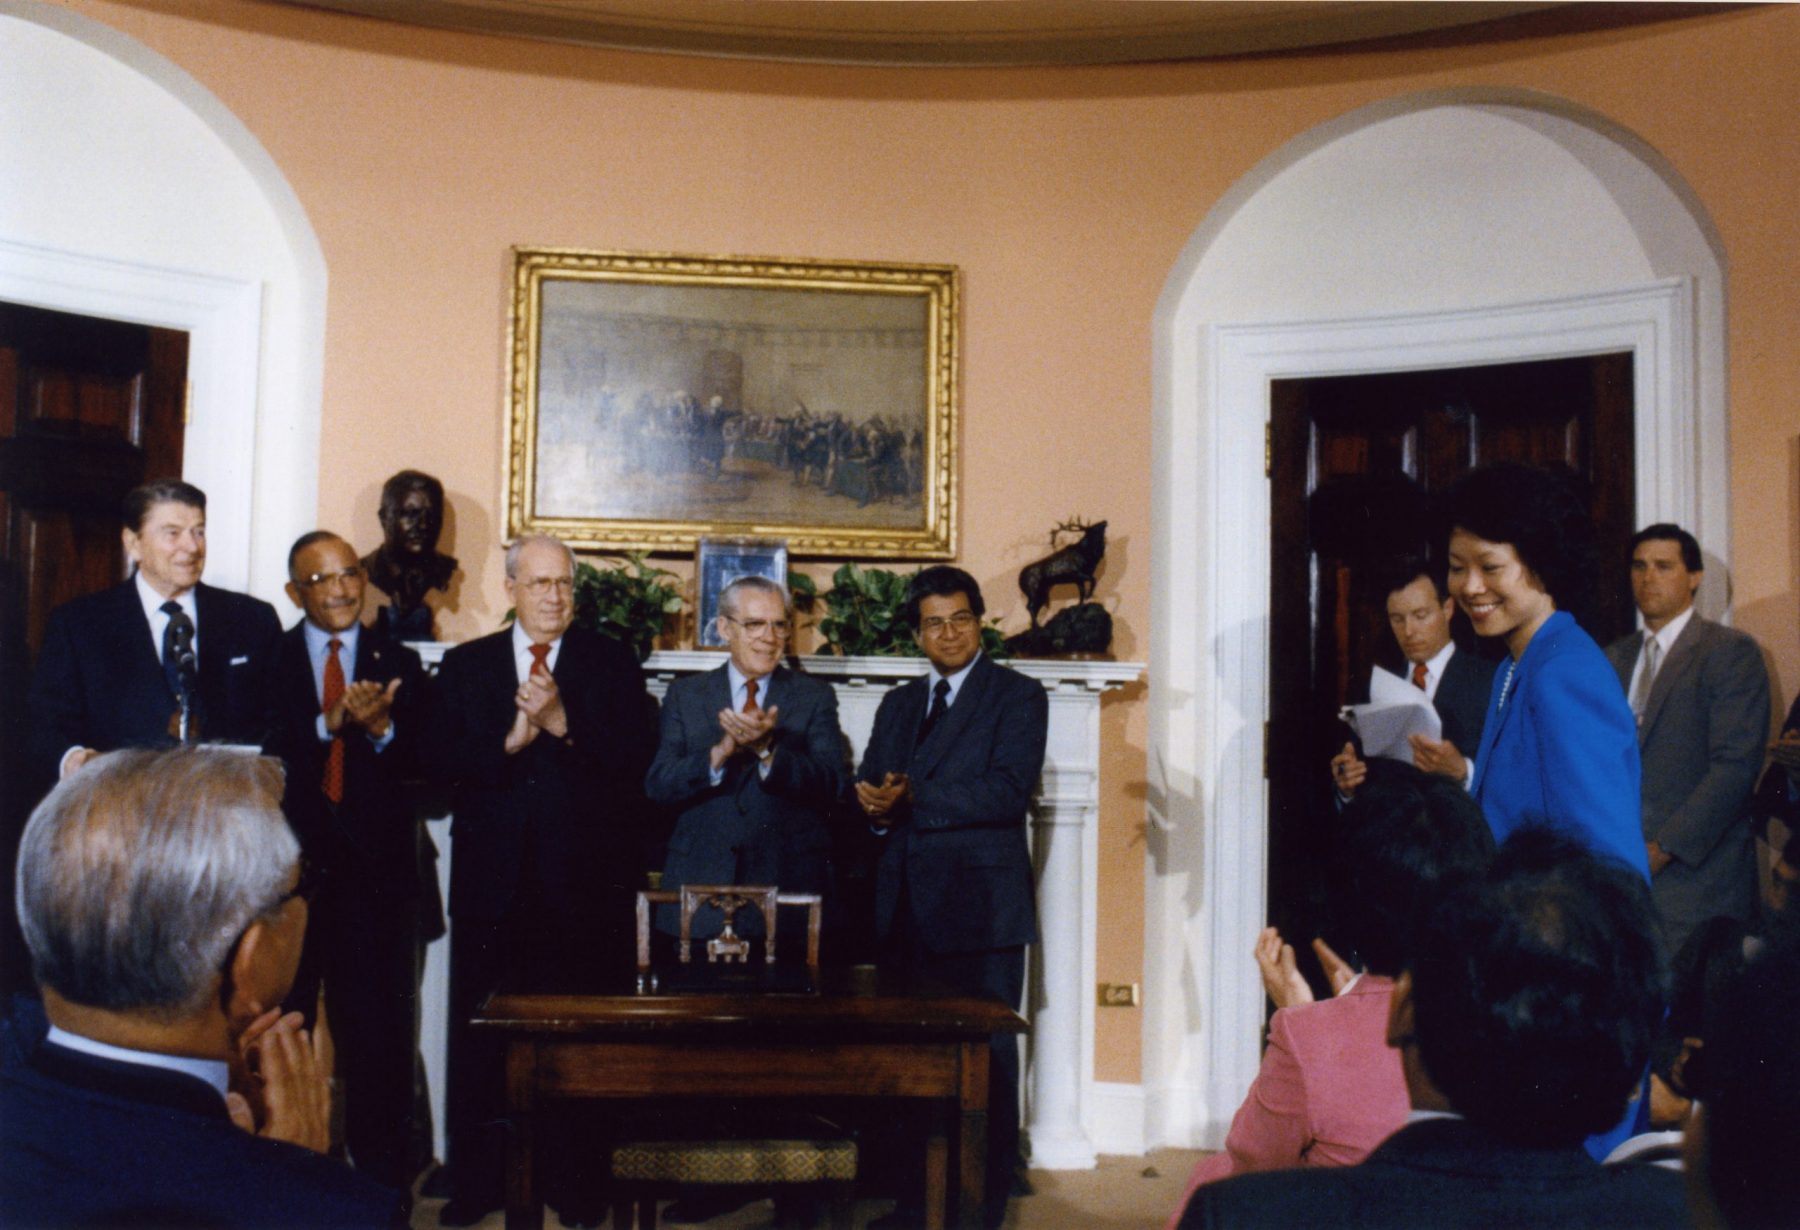 Deputy Maritime Administrator Elaine Chao being acknowledged by President Ronald Reagan at an event in the Roosevelt Room at The White House.